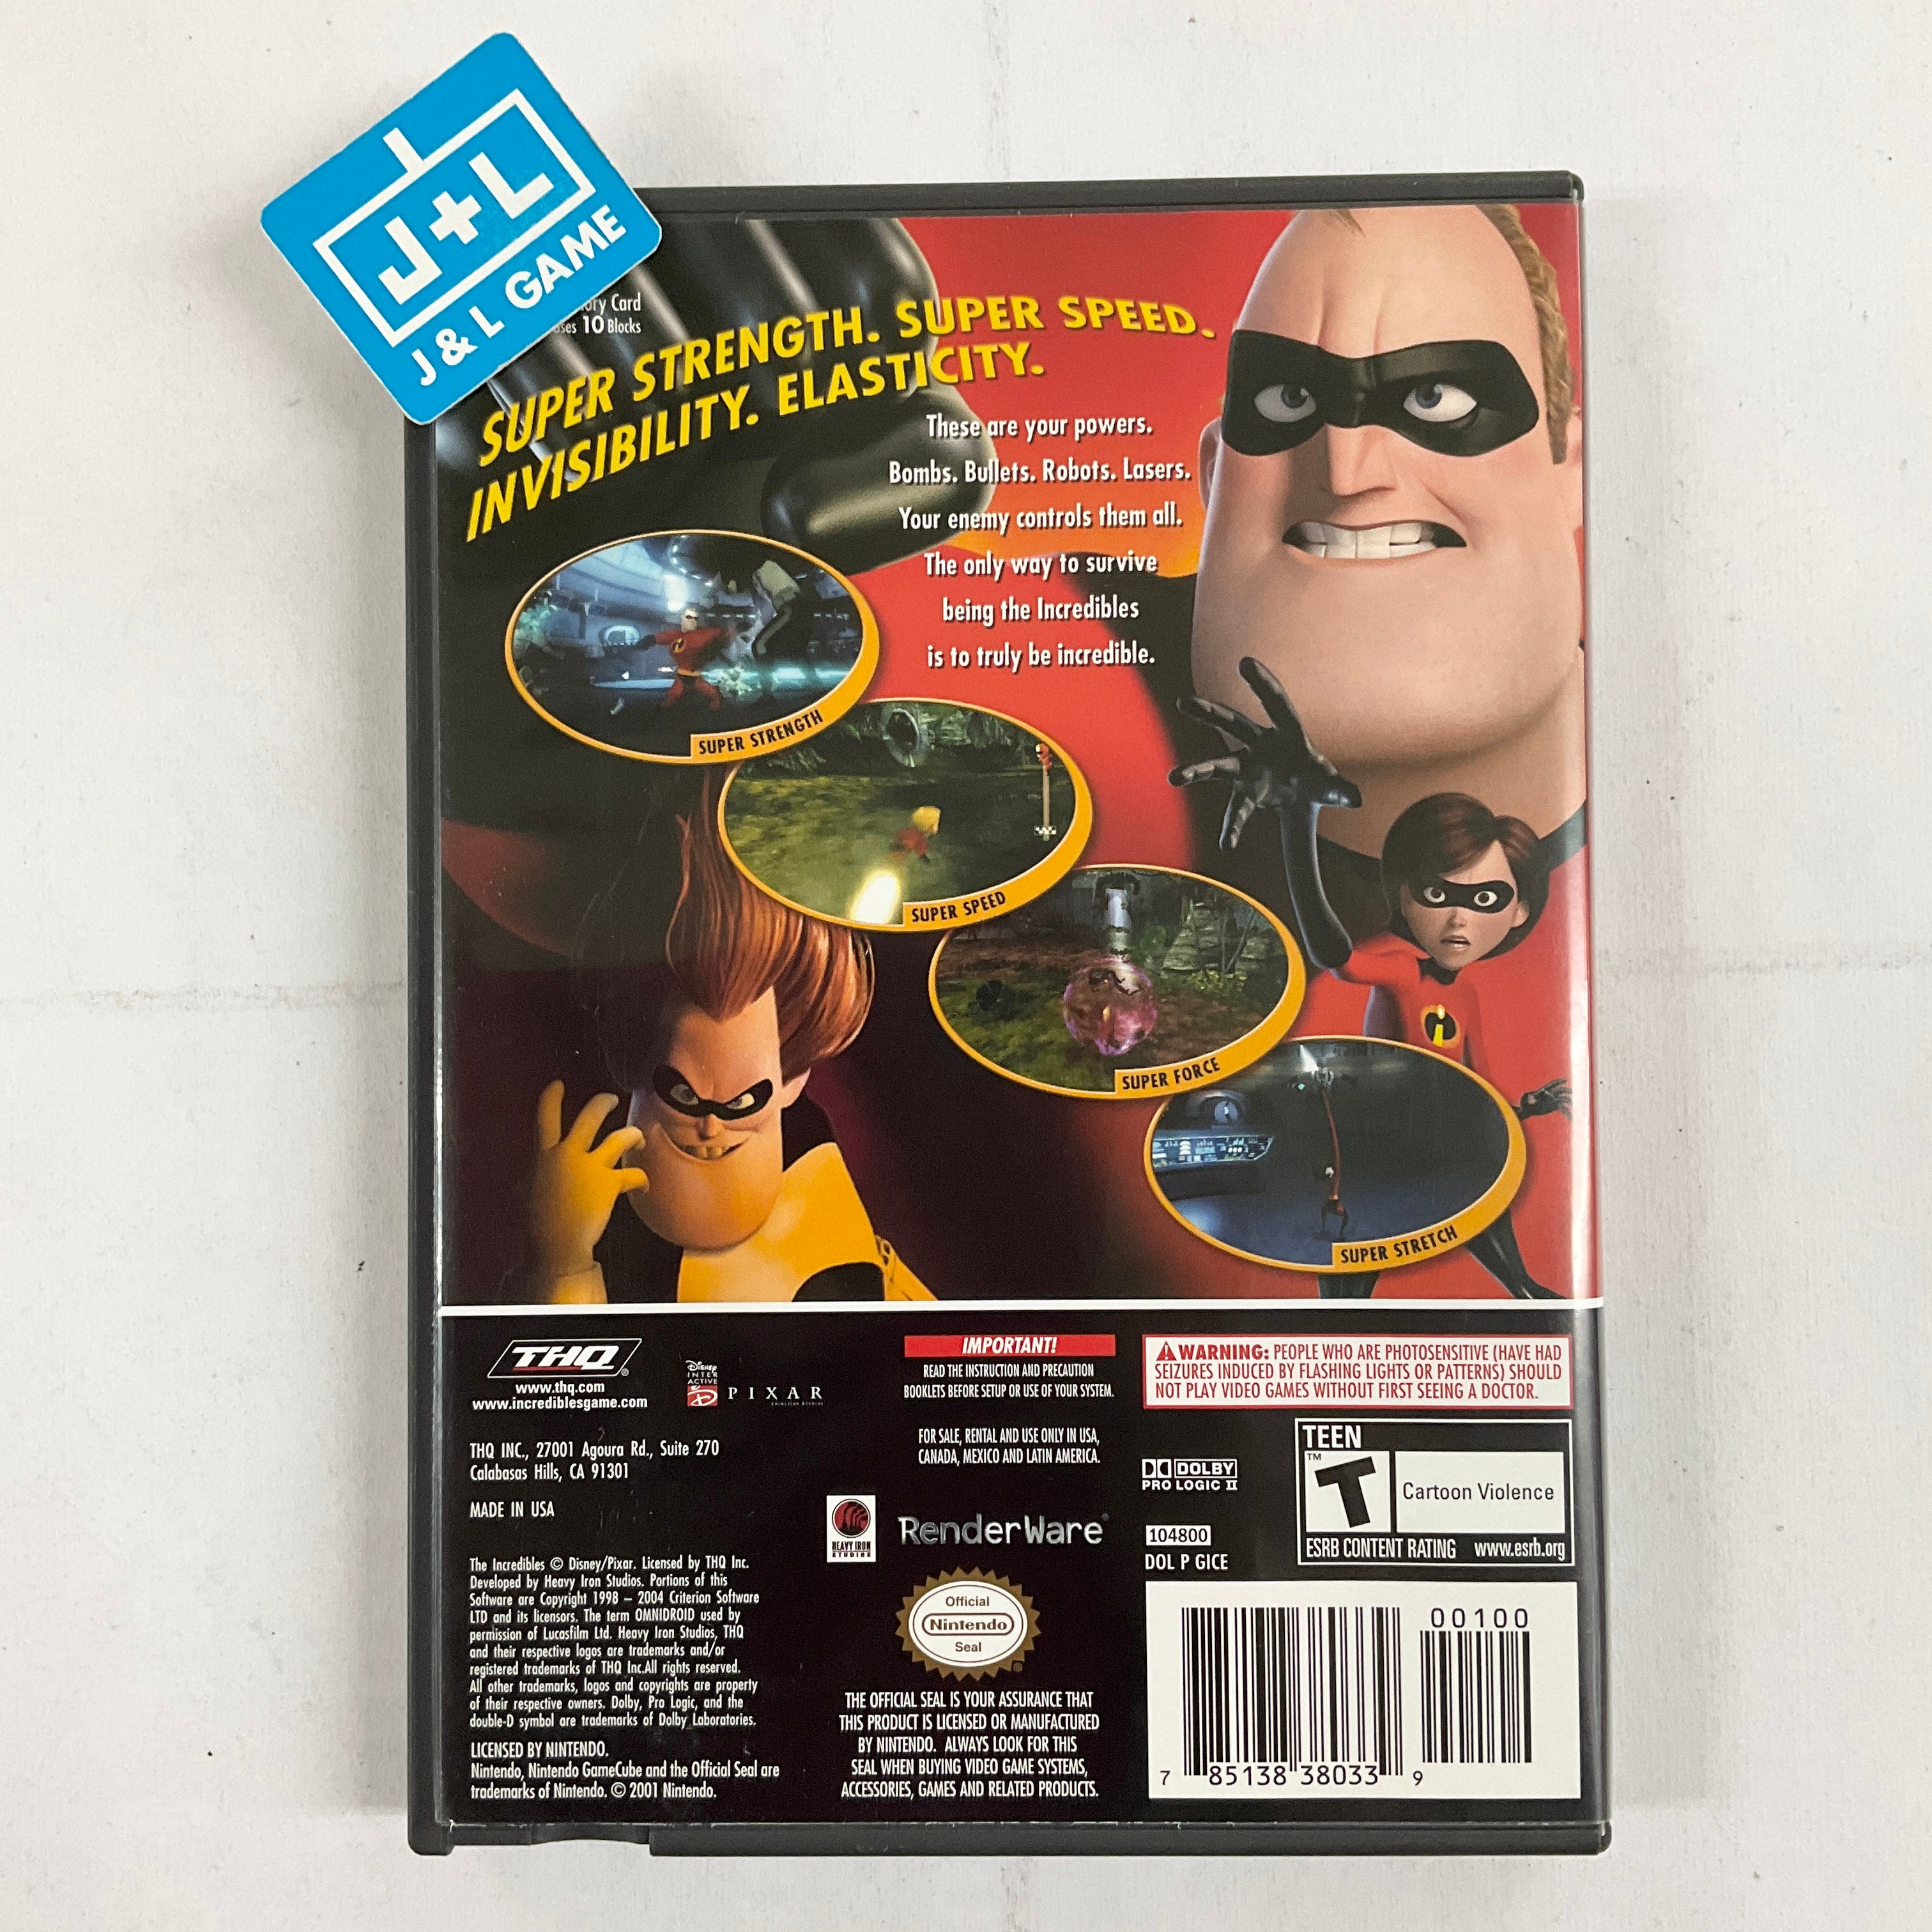 The Incredibles - (GC) GameCube [Pre-Owned] Video Games THQ   